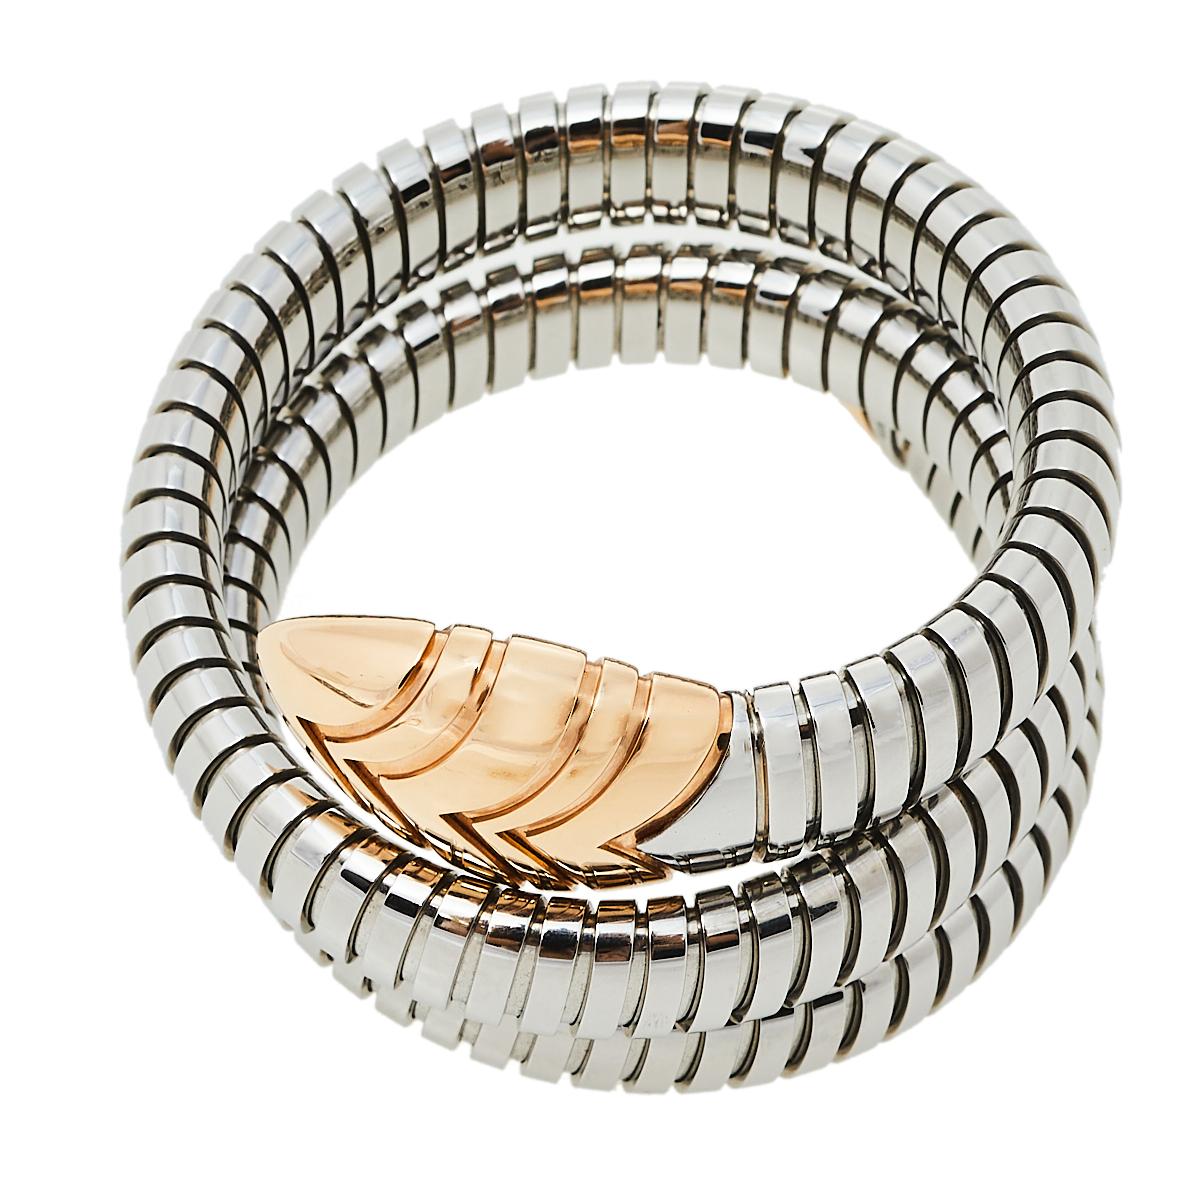 Exuding glamour and unique style, the bracelet is a melange of Bvlgari's two most iconic designs, the Serpenti and Tubogas. The stainless steel body, spiraled thrice, featuring the fine lines of Tubogas technique, represents the sensual curves of a